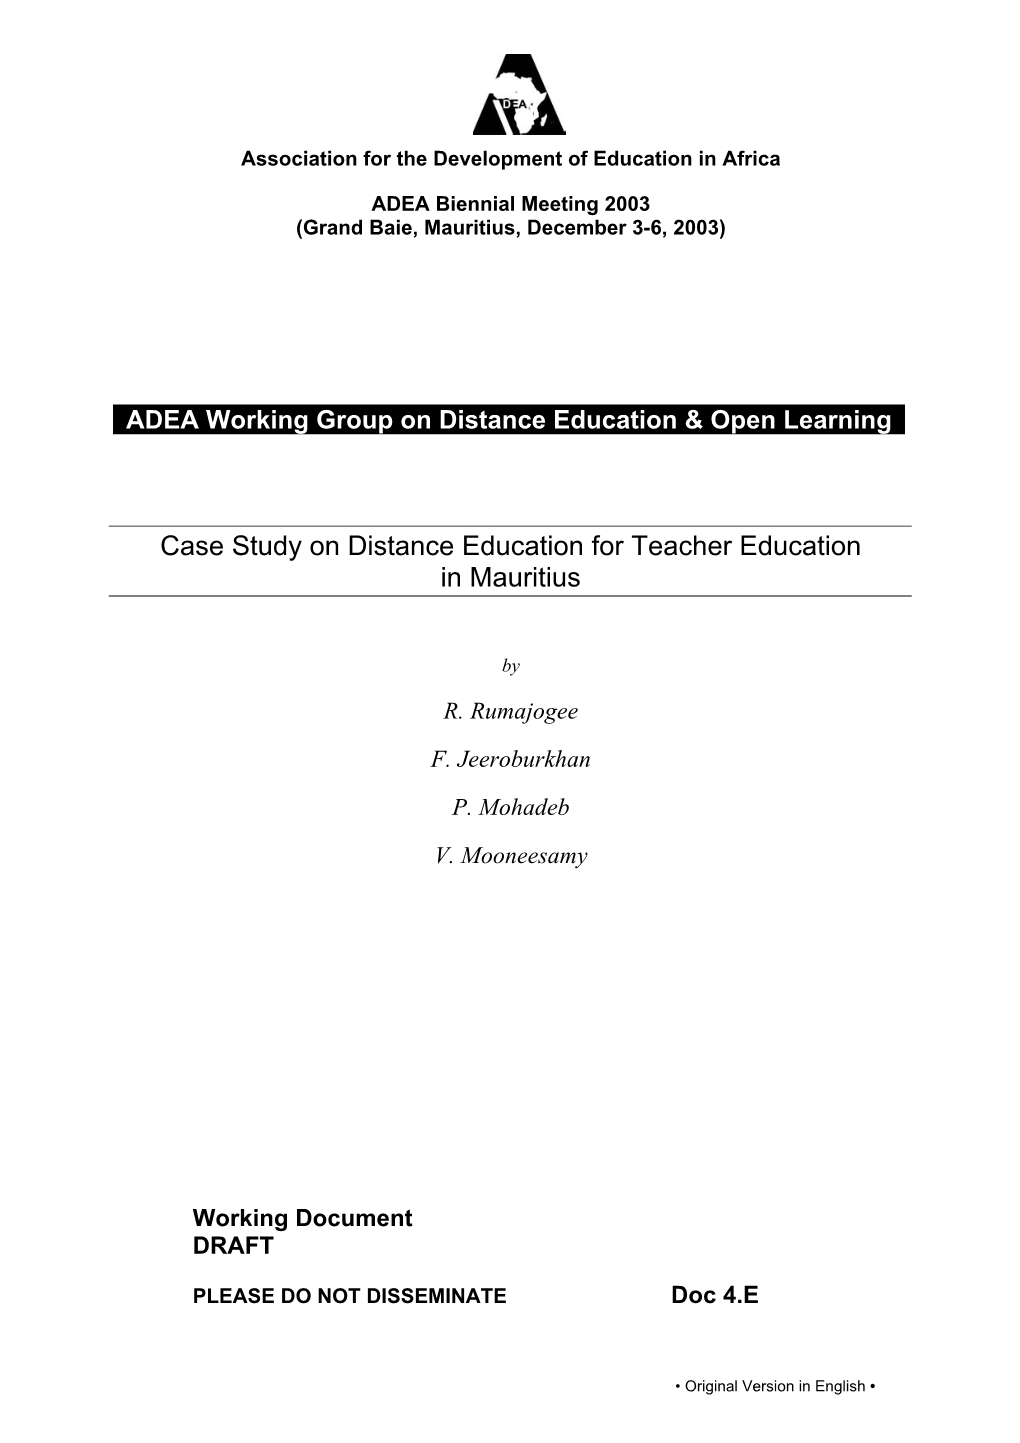 Case Study on Distance Education for Teacher Education in Mauritius